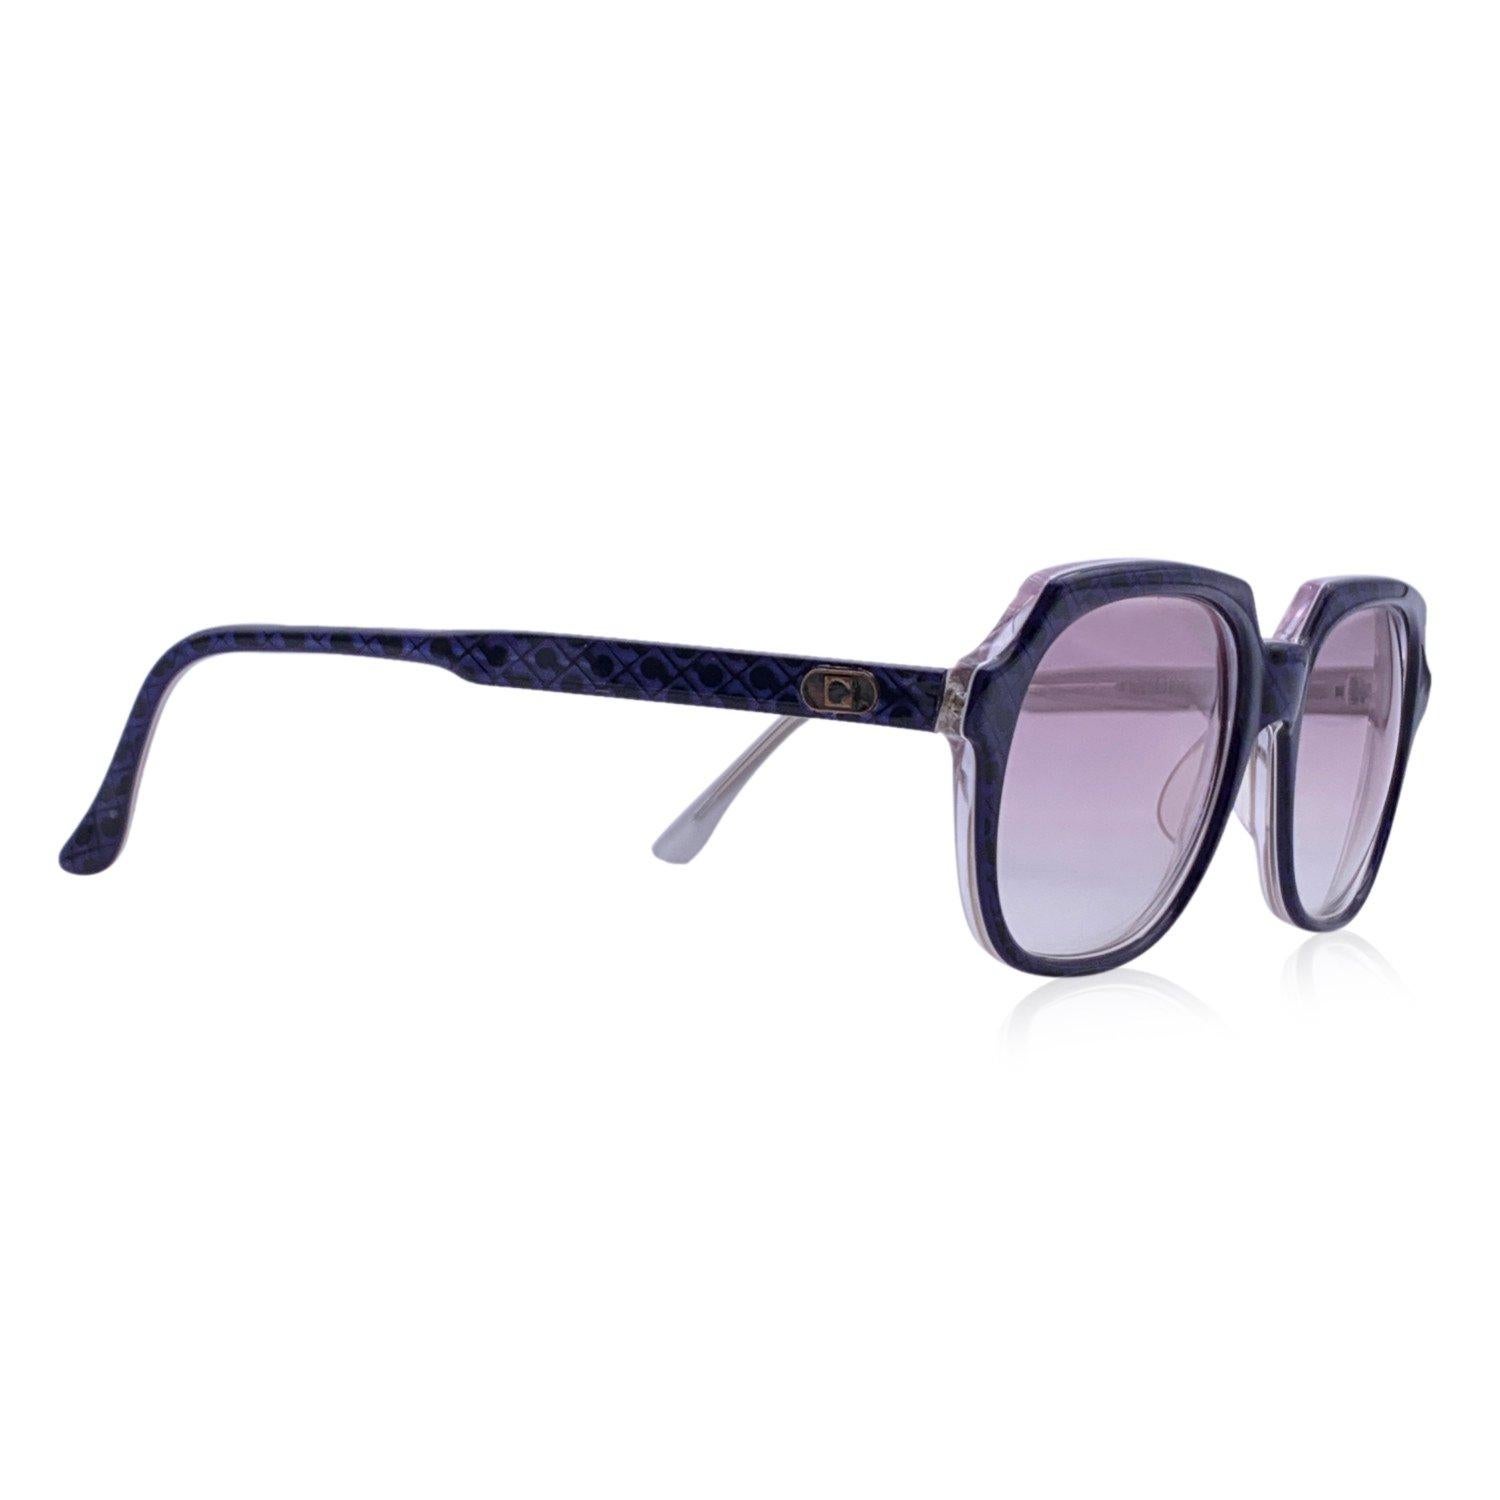 Vintage Gherardini sunglasses, Mod. Lapis - G/11. Blue acetate frame with logo pattern. Squared design. Original 100% Total UVA/UVB protection in gradient light grey color. Gherardini logo on temples. Made in Italy Details MATERIAL: Acetate COLOR: